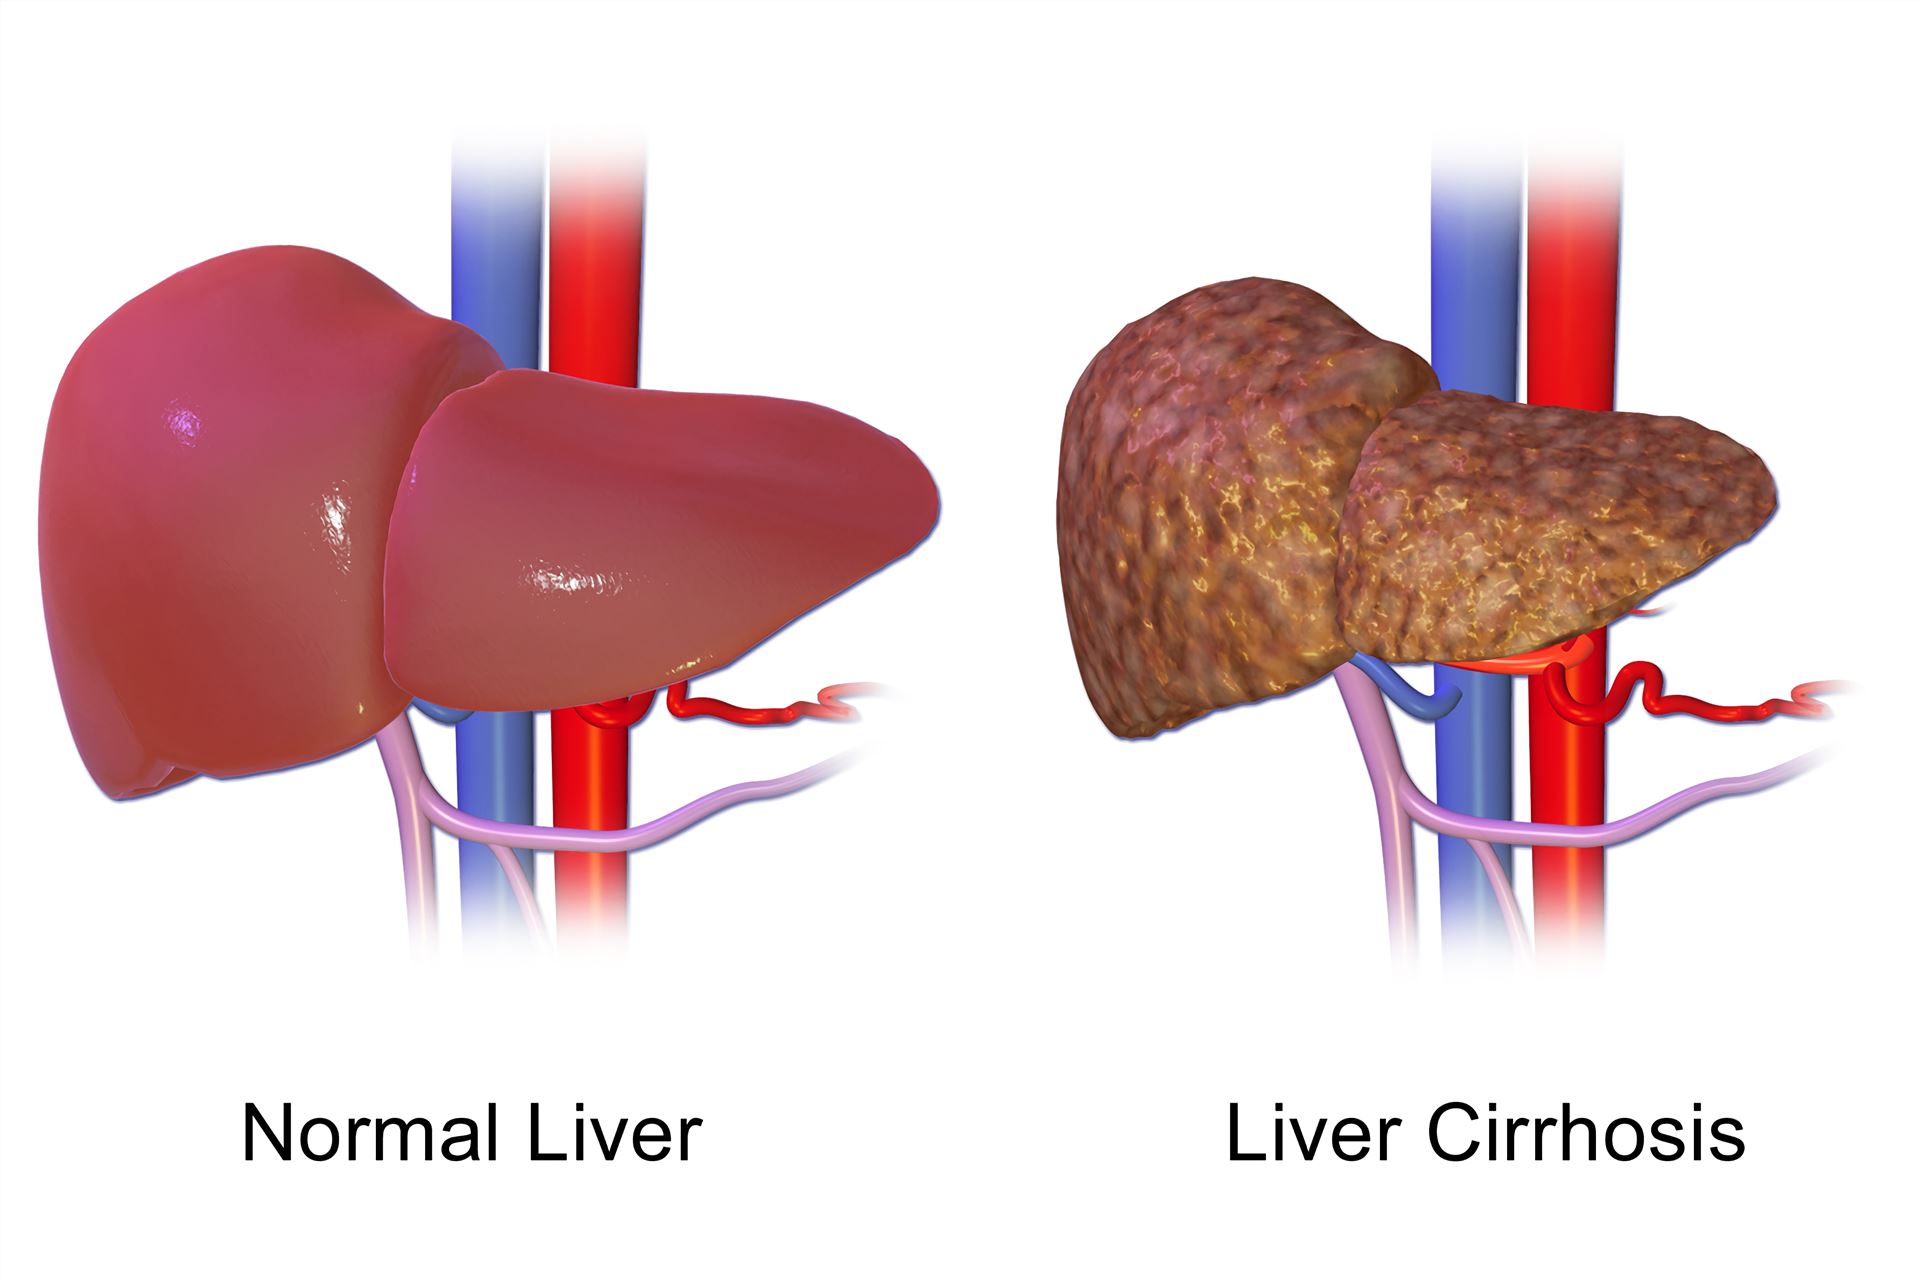 Biomarkers and Antibodies Development for Liver Cirrhosis